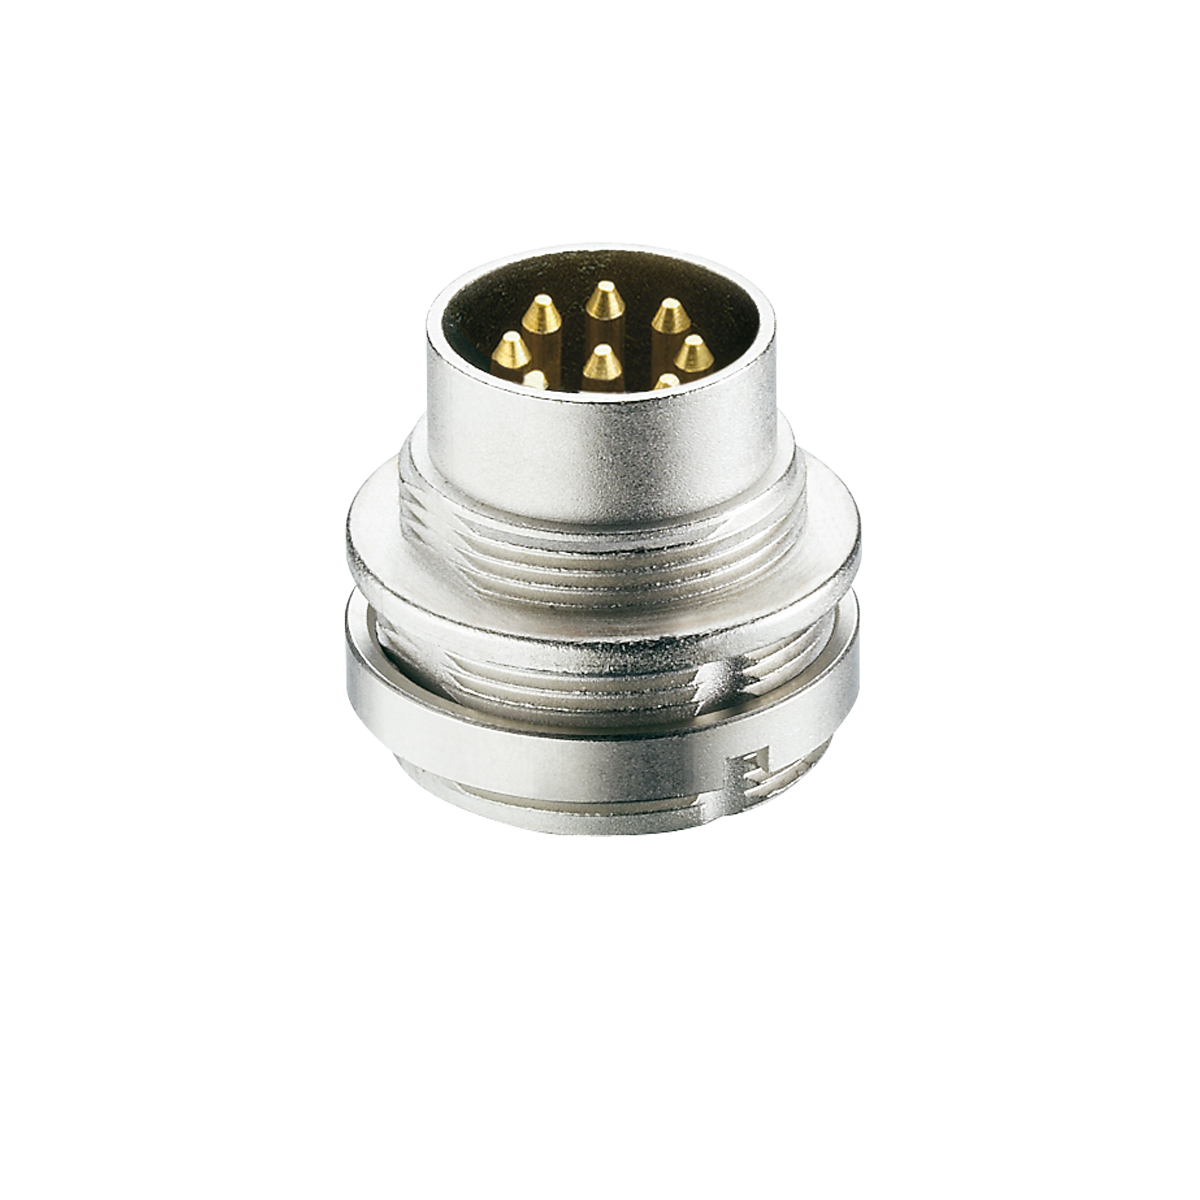 Lumberg: 0314-2 (Series 03 | Circular connectors with threaded joint M16 acc. to IEC 61076-2-106, IP40/IP68)